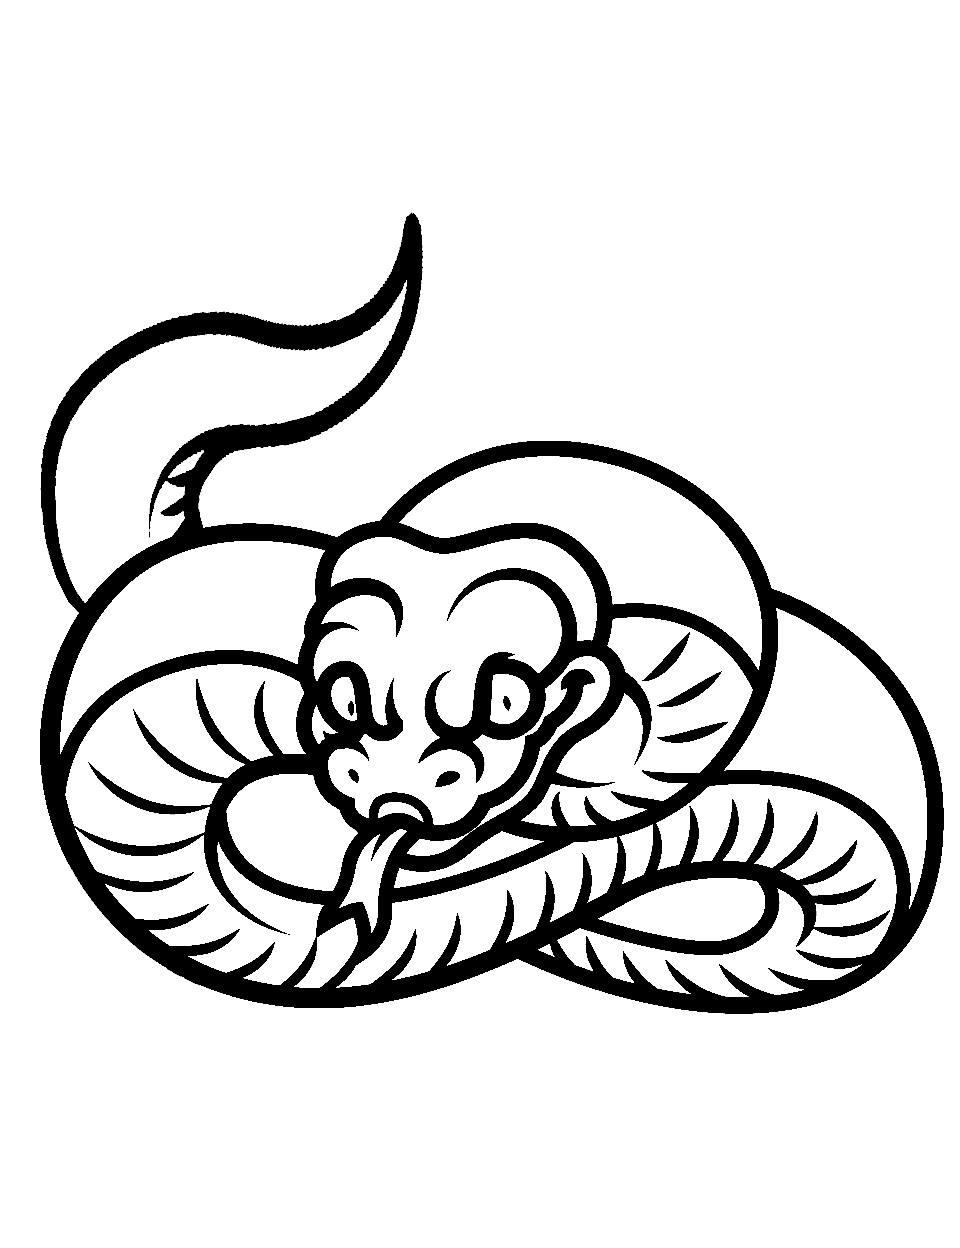 Snake Warning Coloring Page - A snake coiled up with its tail raised, ready to strike.